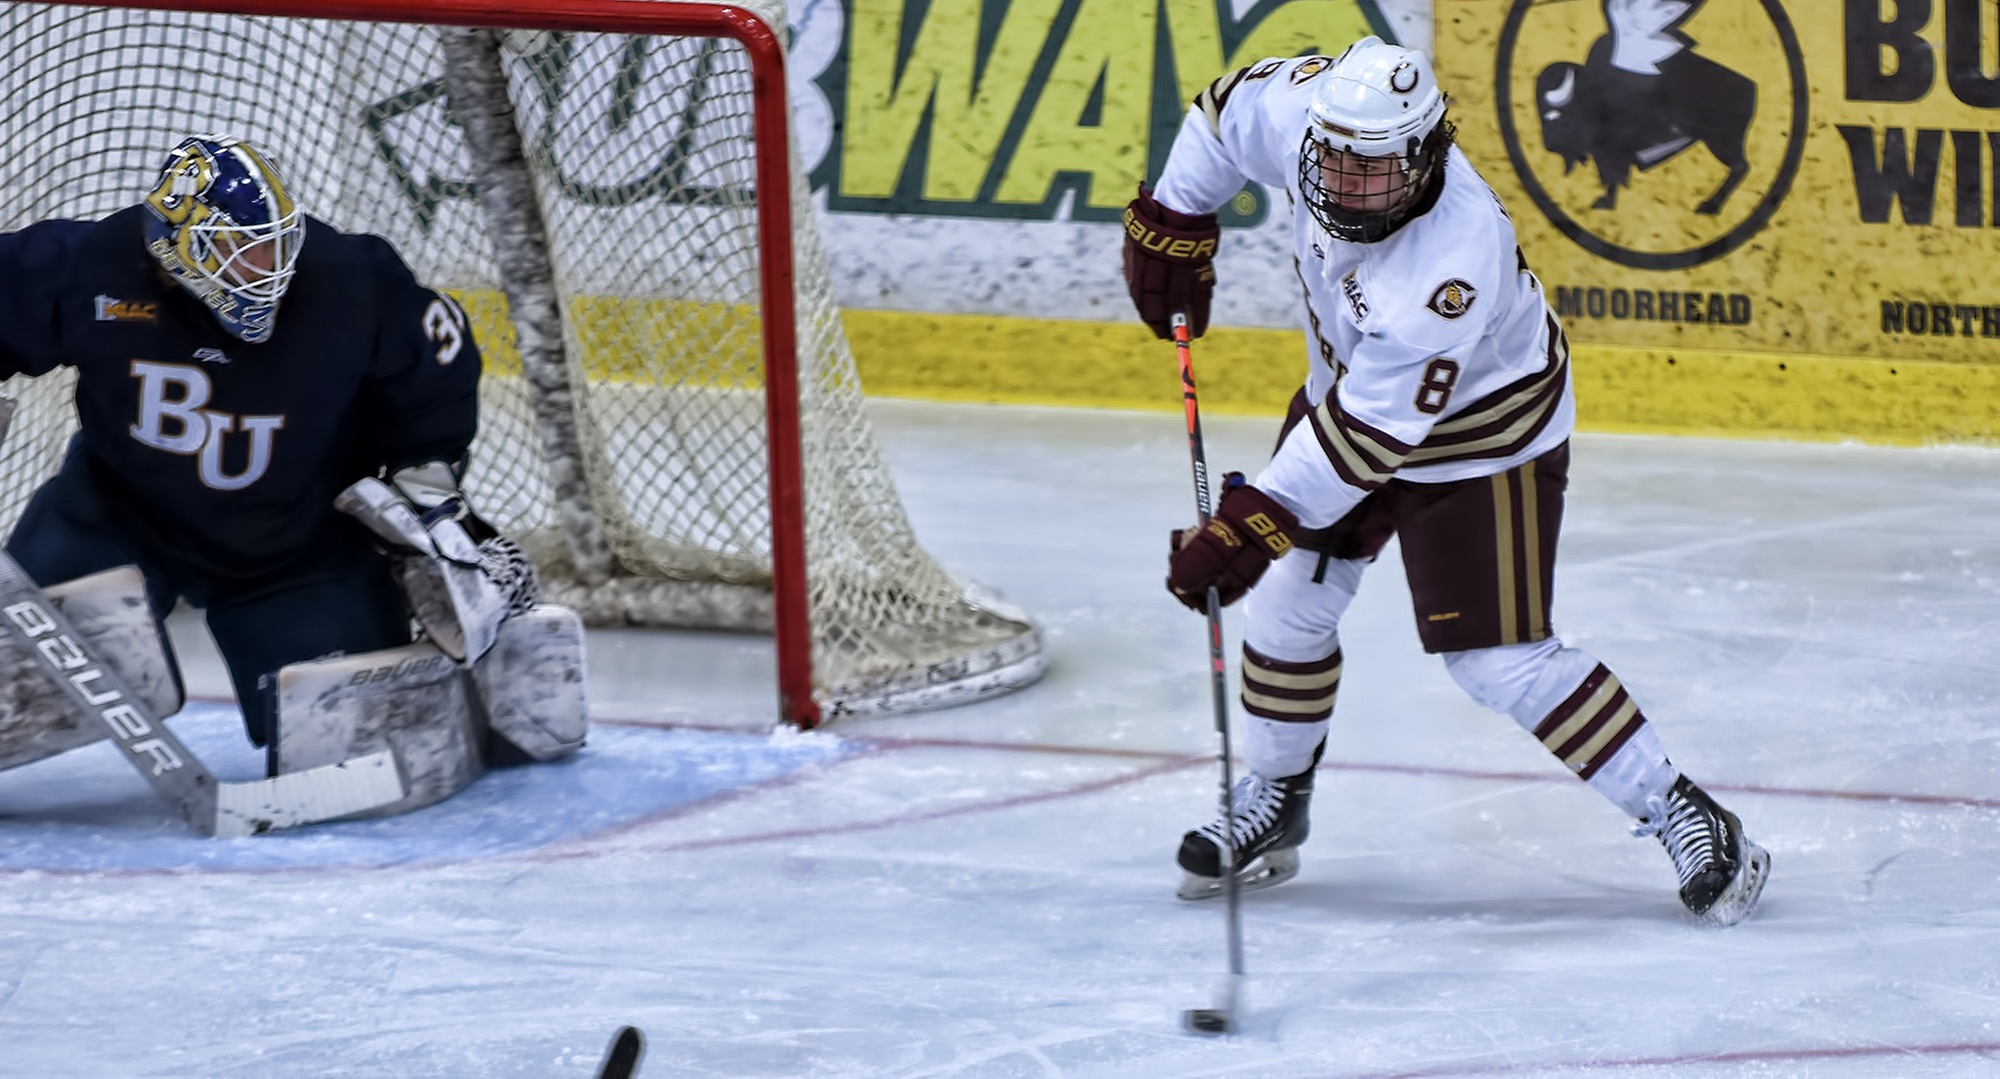 Senior Aaron Herdt makes a centering pass during the first period of the Cobbers' game with Bethel. Herdt scored both game-winning goals in the sweep over the Royals.